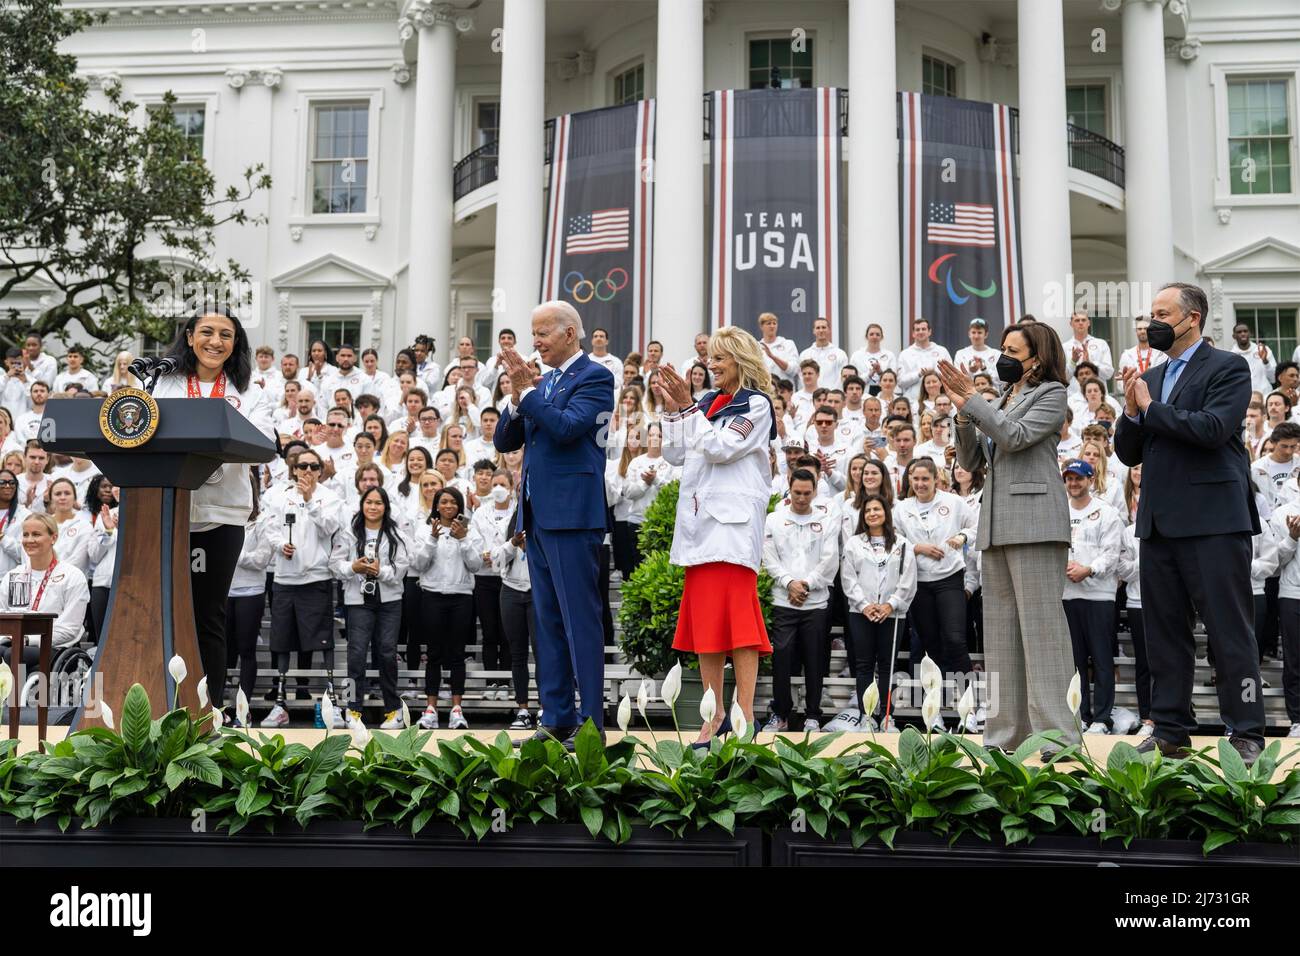 Washington, United States of America. 04 May, 2022. U.S President Joe Biden applauds U.S. Olympic team bobsled medalist Elana Meyers Taylor during an event welcoming the athletes that participated in the Tokyo 2020 Summer Olympic and Paralympics, Beijing 2022 Winter Olympic and Paralympics, on the South Lawn of the White House, May 4, 2022 in Washington, D.C.  Credit: Adam Schultz/White House Photo/Alamy Live News Stock Photo